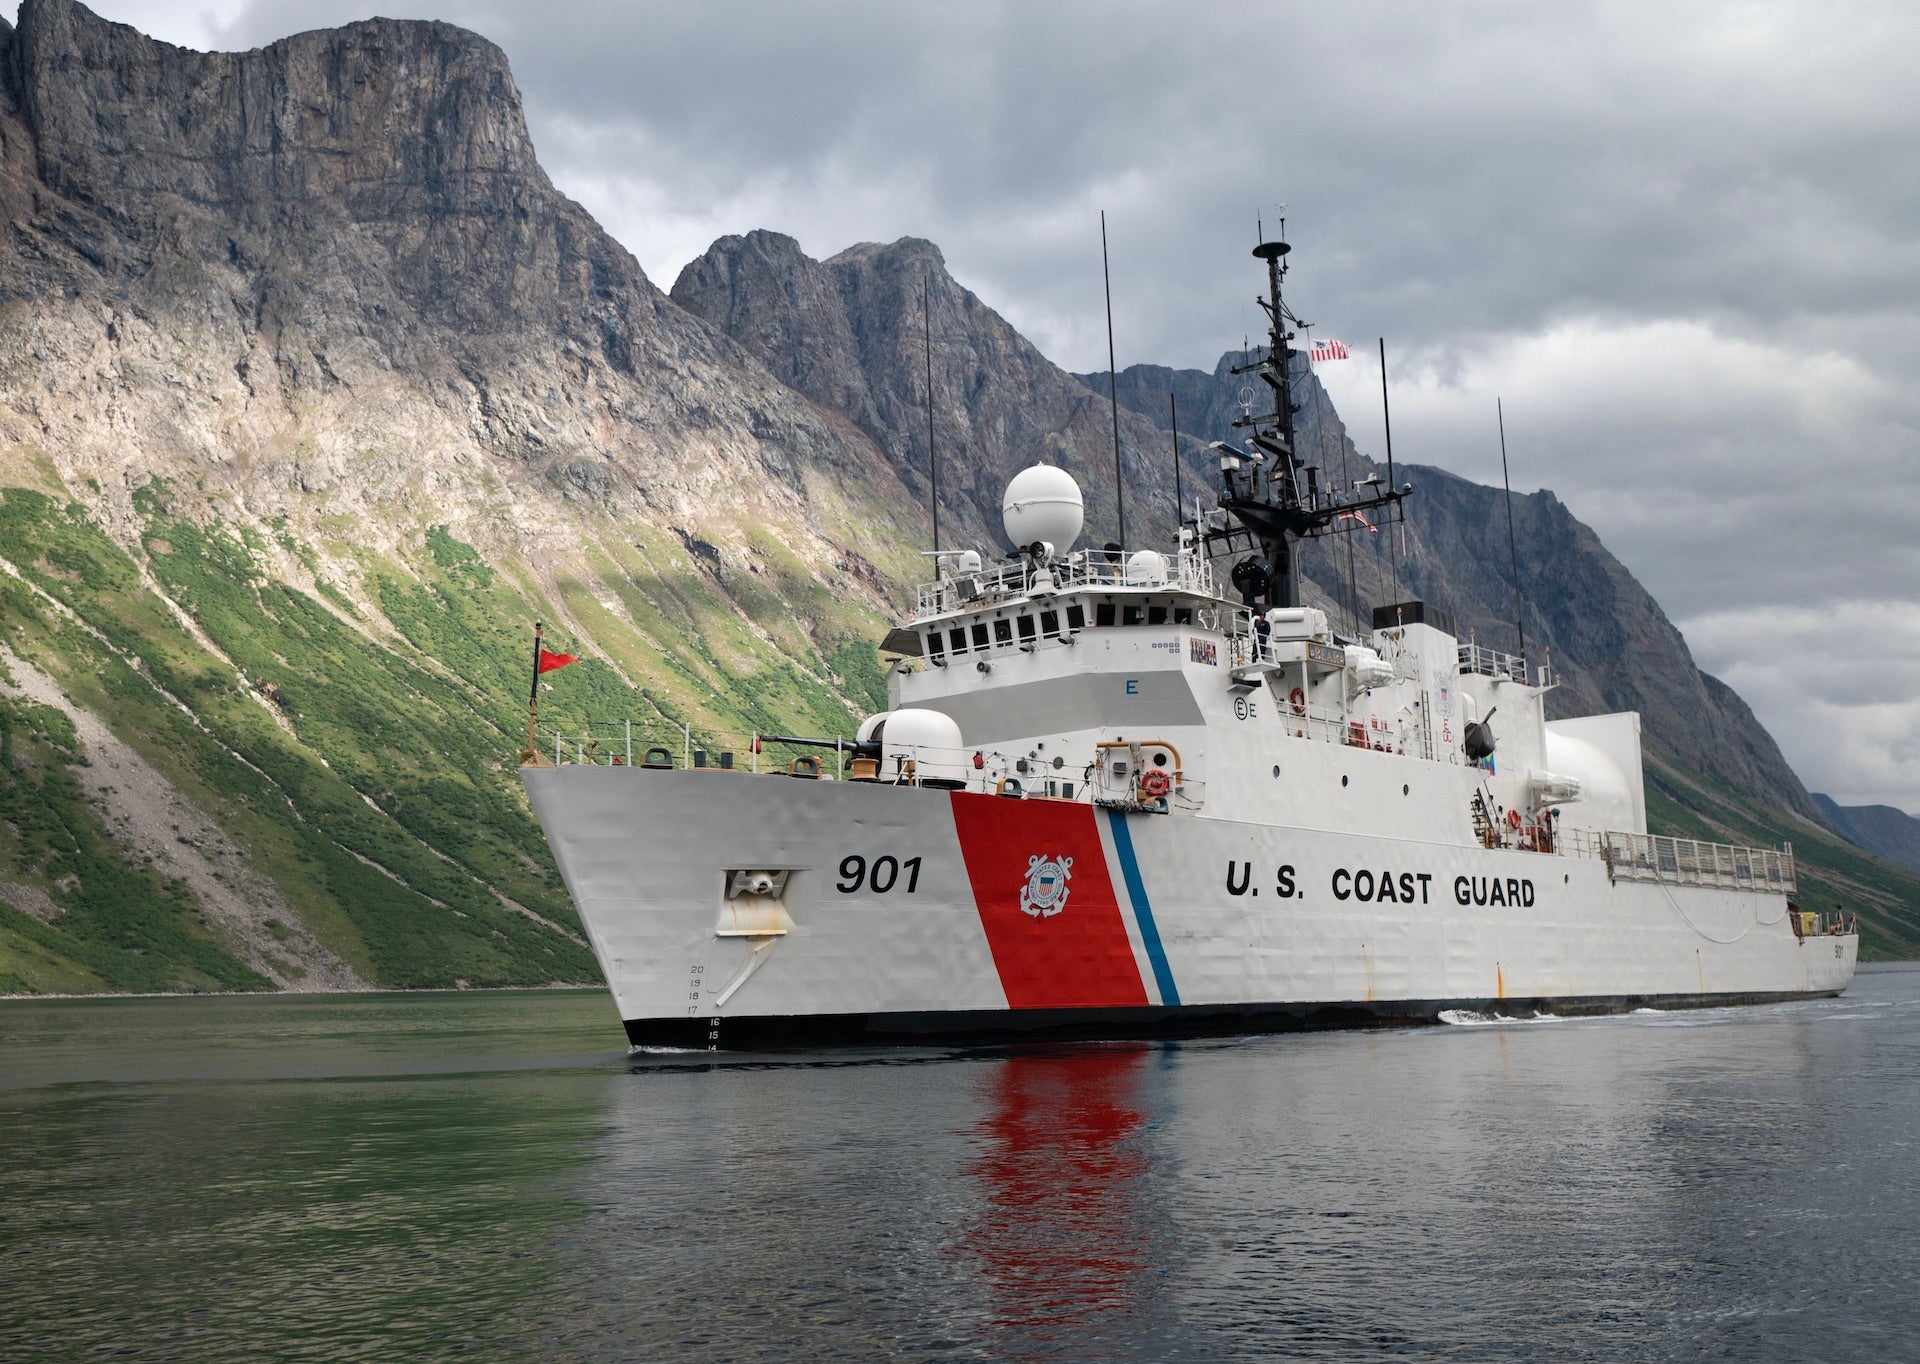 USCGC Bear (WMEC 901) transits out of Torngat National Park, Canada, during Operation Nanook, Aug. 9, 2022. The Bear is partaking in the Tuugaalik phase of Operation Nanook, an annual exercise that allows the United States and multiple other partner nations to ensure security and enhance interoperability in Arctic waters. (U.S. Coast Guard photo by Petty Officer 3rd Class Matthew Abban)